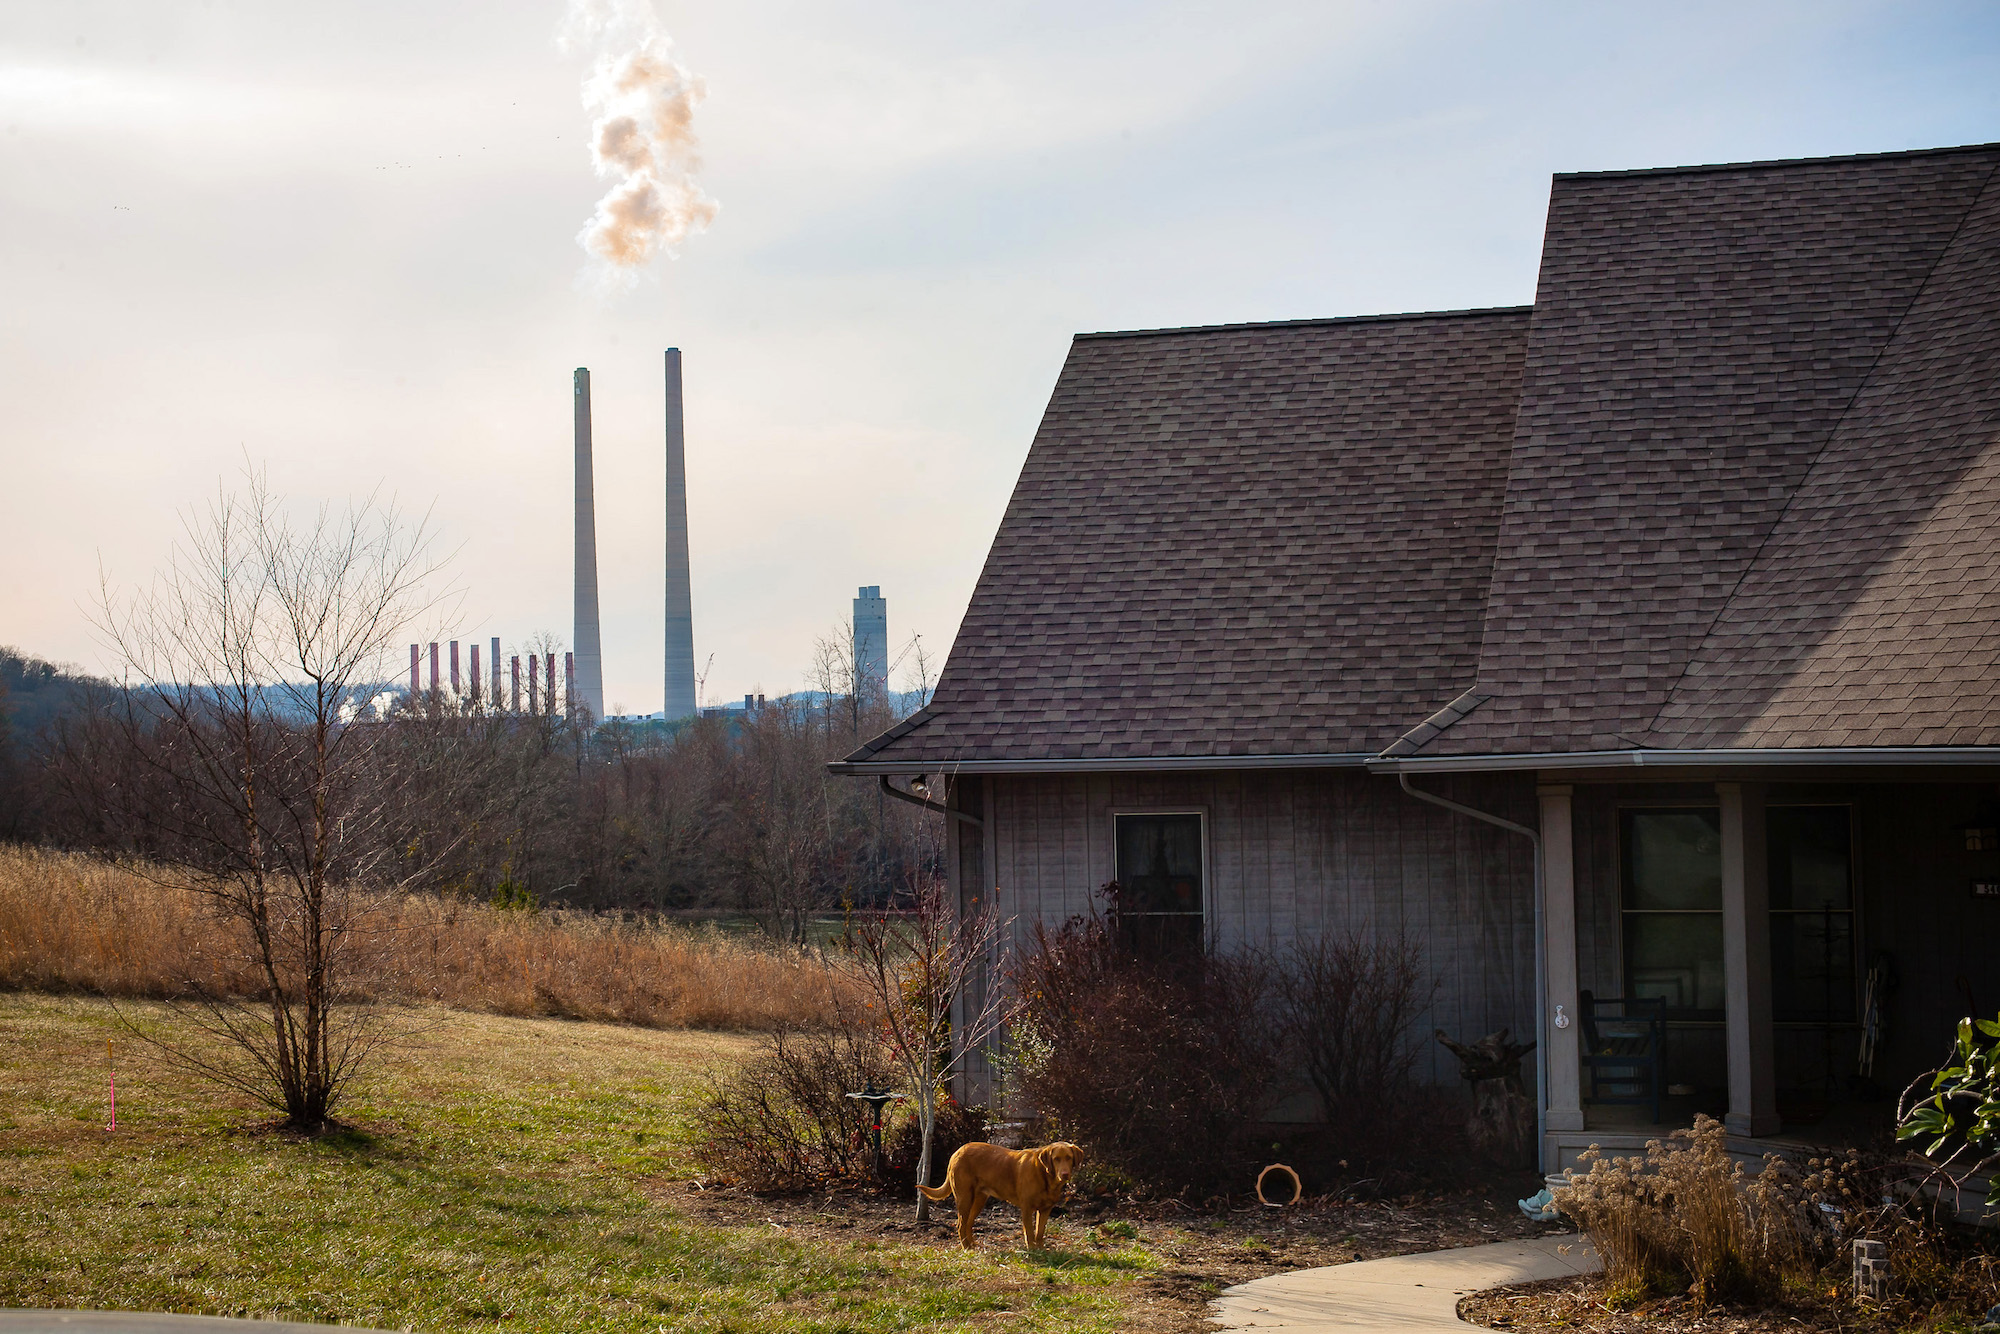 a photo of a house with a dog outside and the TVA plant in the distance